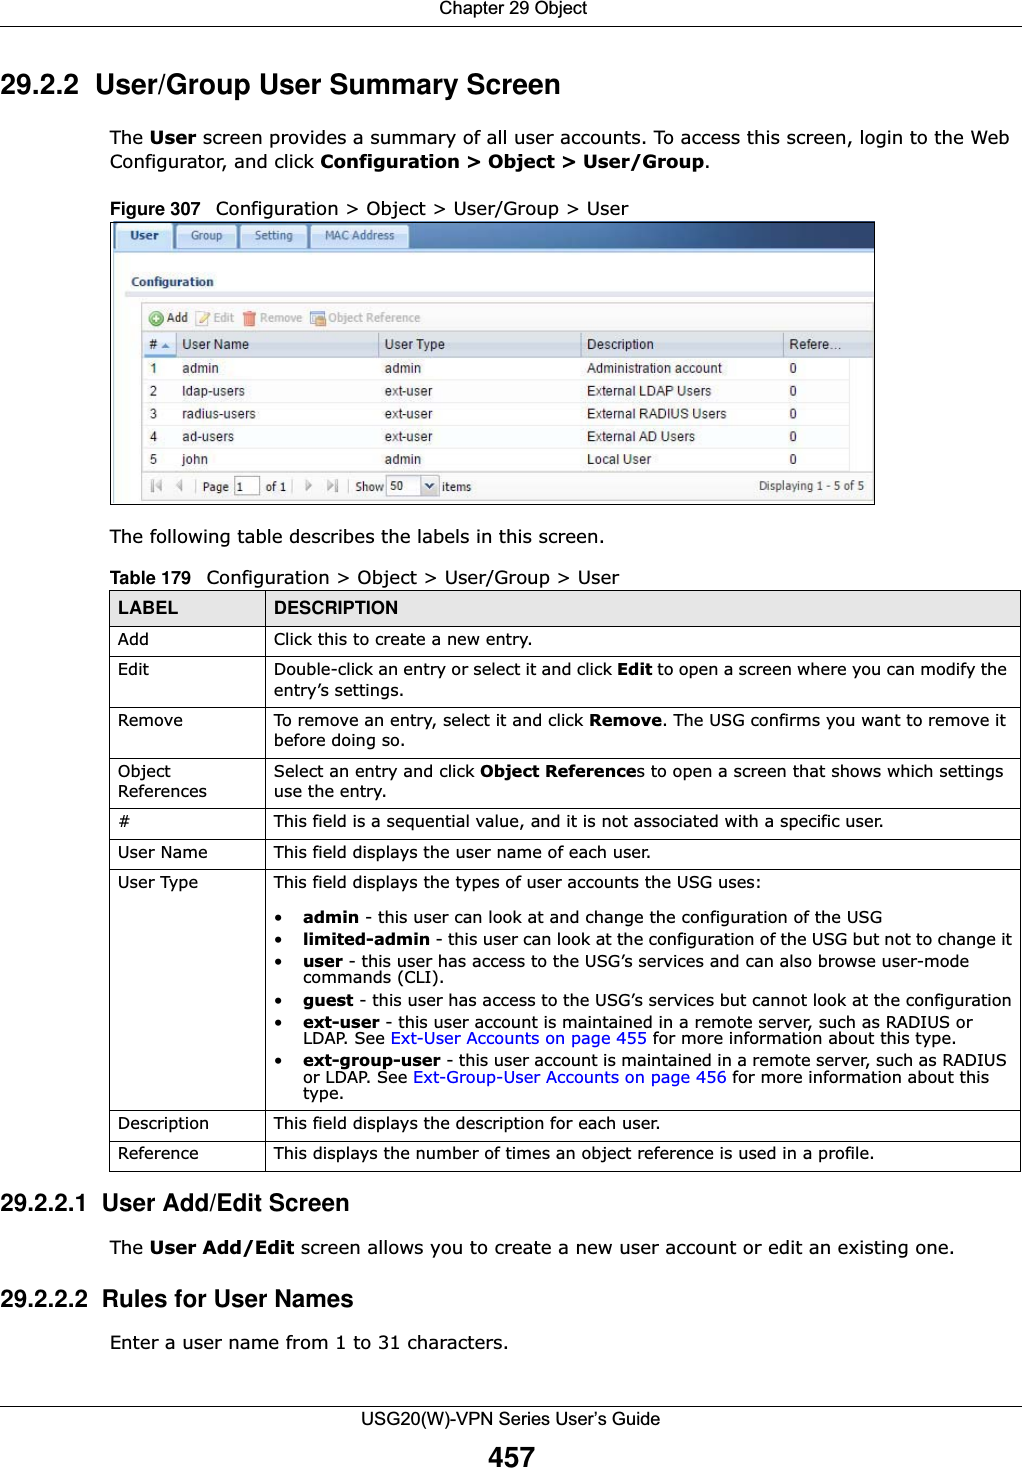  Chapter 29 ObjectUSG20(W)-VPN Series User’s Guide45729.2.2  User/Group User Summary ScreenThe User screen provides a summary of all user accounts. To access this screen, login to the Web Configurator, and click Configuration &gt; Object &gt; User/Group.Figure 307   Configuration &gt; Object &gt; User/Group &gt; UserThe following table describes the labels in this screen.  29.2.2.1  User Add/Edit Screen The User Add/Edit screen allows you to create a new user account or edit an existing one. 29.2.2.2  Rules for User NamesEnter a user name from 1 to 31 characters.Table 179   Configuration &gt; Object &gt; User/Group &gt; UserLABEL DESCRIPTIONAdd Click this to create a new entry.Edit Double-click an entry or select it and click Edit to open a screen where you can modify the entry’s settings. Remove To remove an entry, select it and click Remove. The USG confirms you want to remove it before doing so.Object ReferencesSelect an entry and click Object References to open a screen that shows which settings use the entry. # This field is a sequential value, and it is not associated with a specific user.User Name This field displays the user name of each user.User Type This field displays the types of user accounts the USG uses: •admin - this user can look at and change the configuration of the USG•limited-admin - this user can look at the configuration of the USG but not to change it•user - this user has access to the USG’s services and can also browse user-mode commands (CLI).•guest - this user has access to the USG’s services but cannot look at the configuration•ext-user - this user account is maintained in a remote server, such as RADIUS or LDAP. See Ext-User Accounts on page 455 for more information about this type.•ext-group-user - this user account is maintained in a remote server, such as RADIUS or LDAP. See Ext-Group-User Accounts on page 456 for more information about this type.Description This field displays the description for each user.Reference This displays the number of times an object reference is used in a profile.